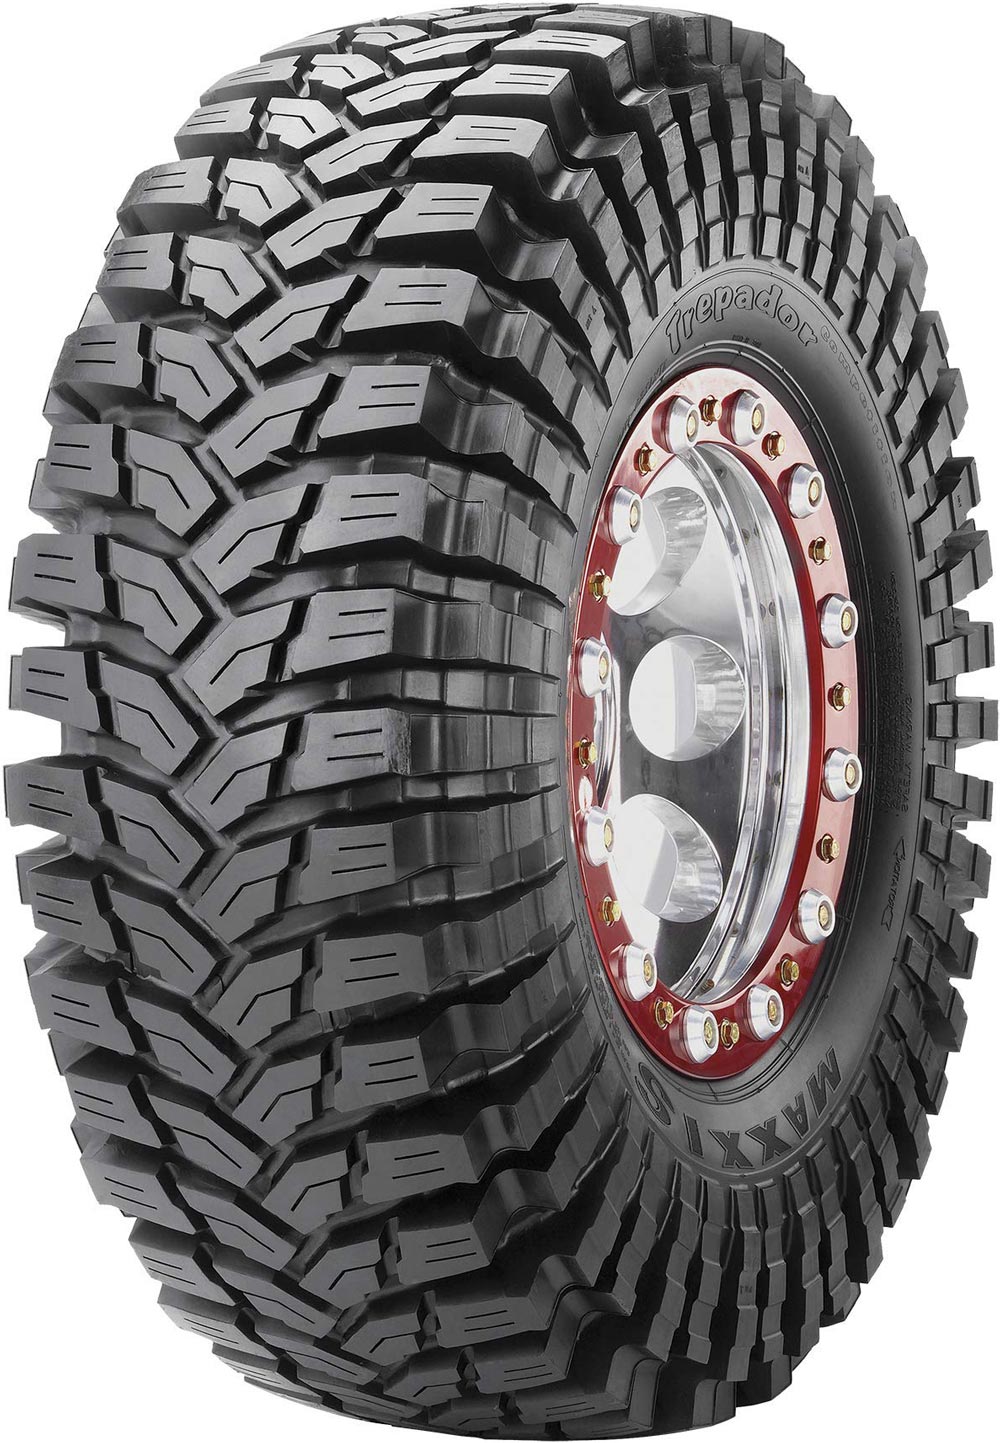 Джипови гуми MAXXIS M8060 COMPETITION YL 42/14.5 R17 121K